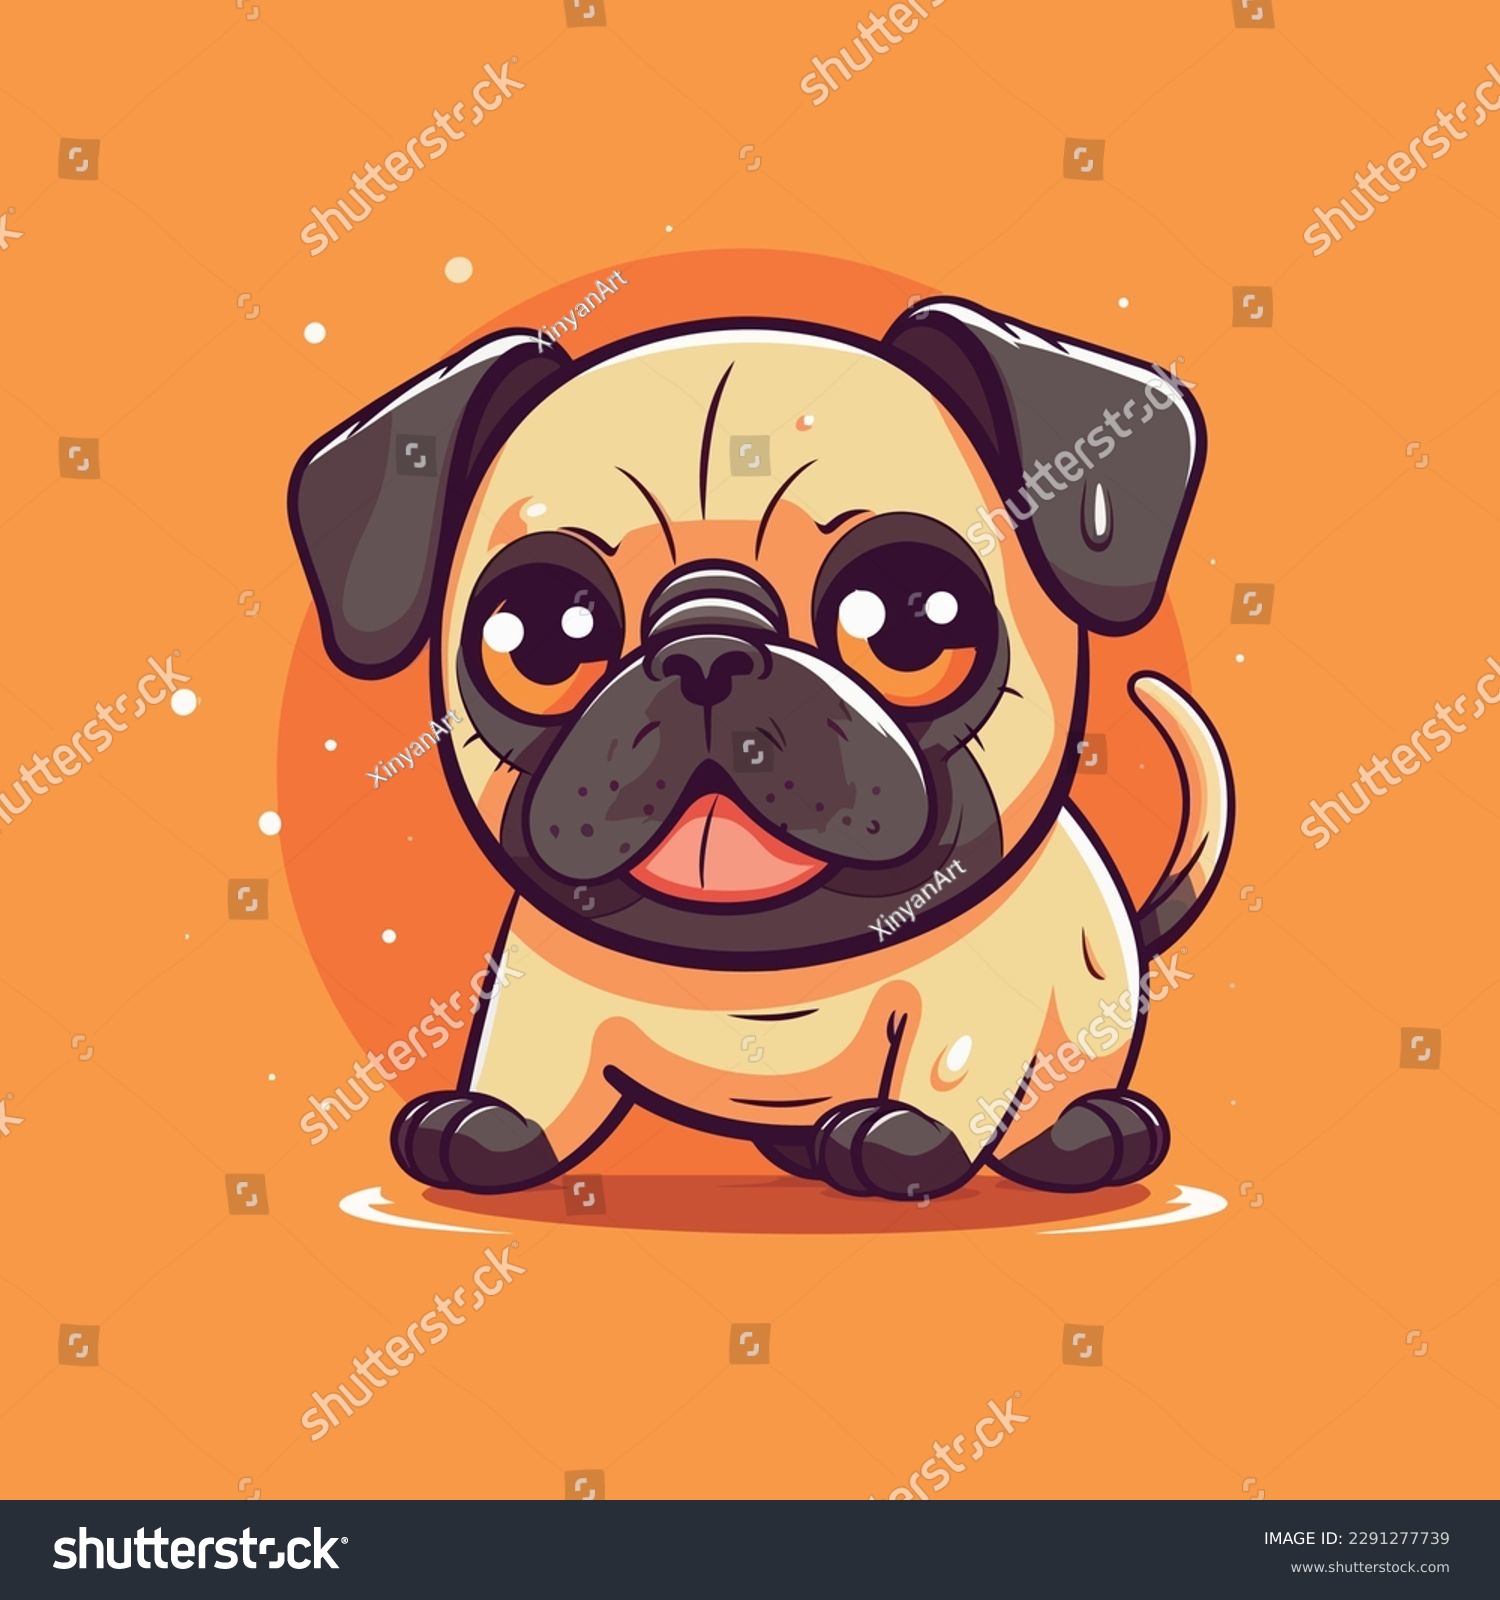 SVG of Cartoon funny dog mascot vector illustration character concept animal icon isolated svg